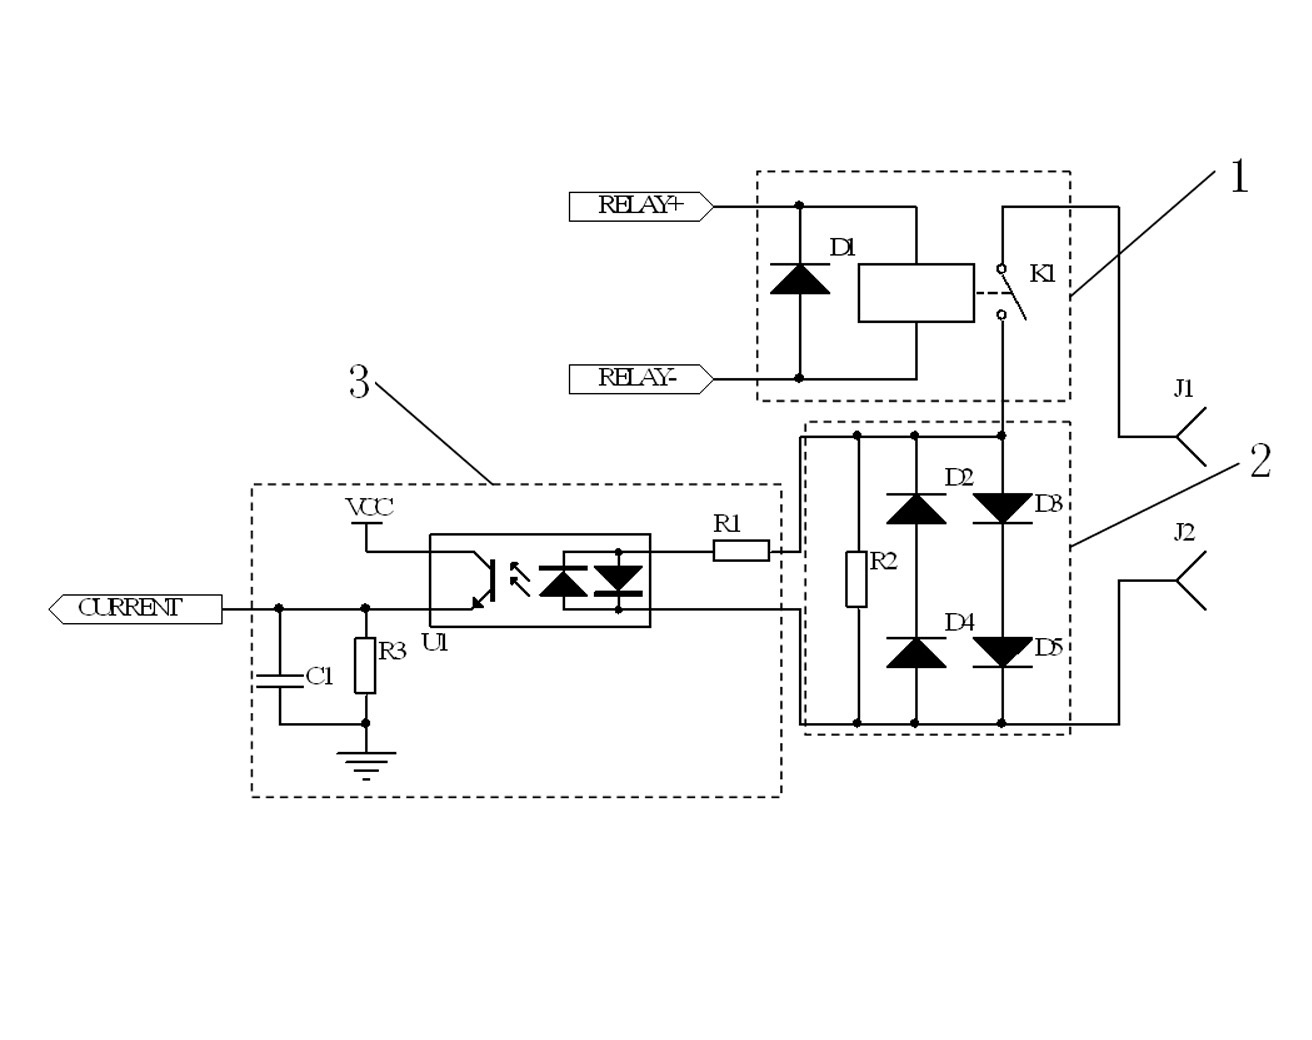 Relay control circuit with current detecting function